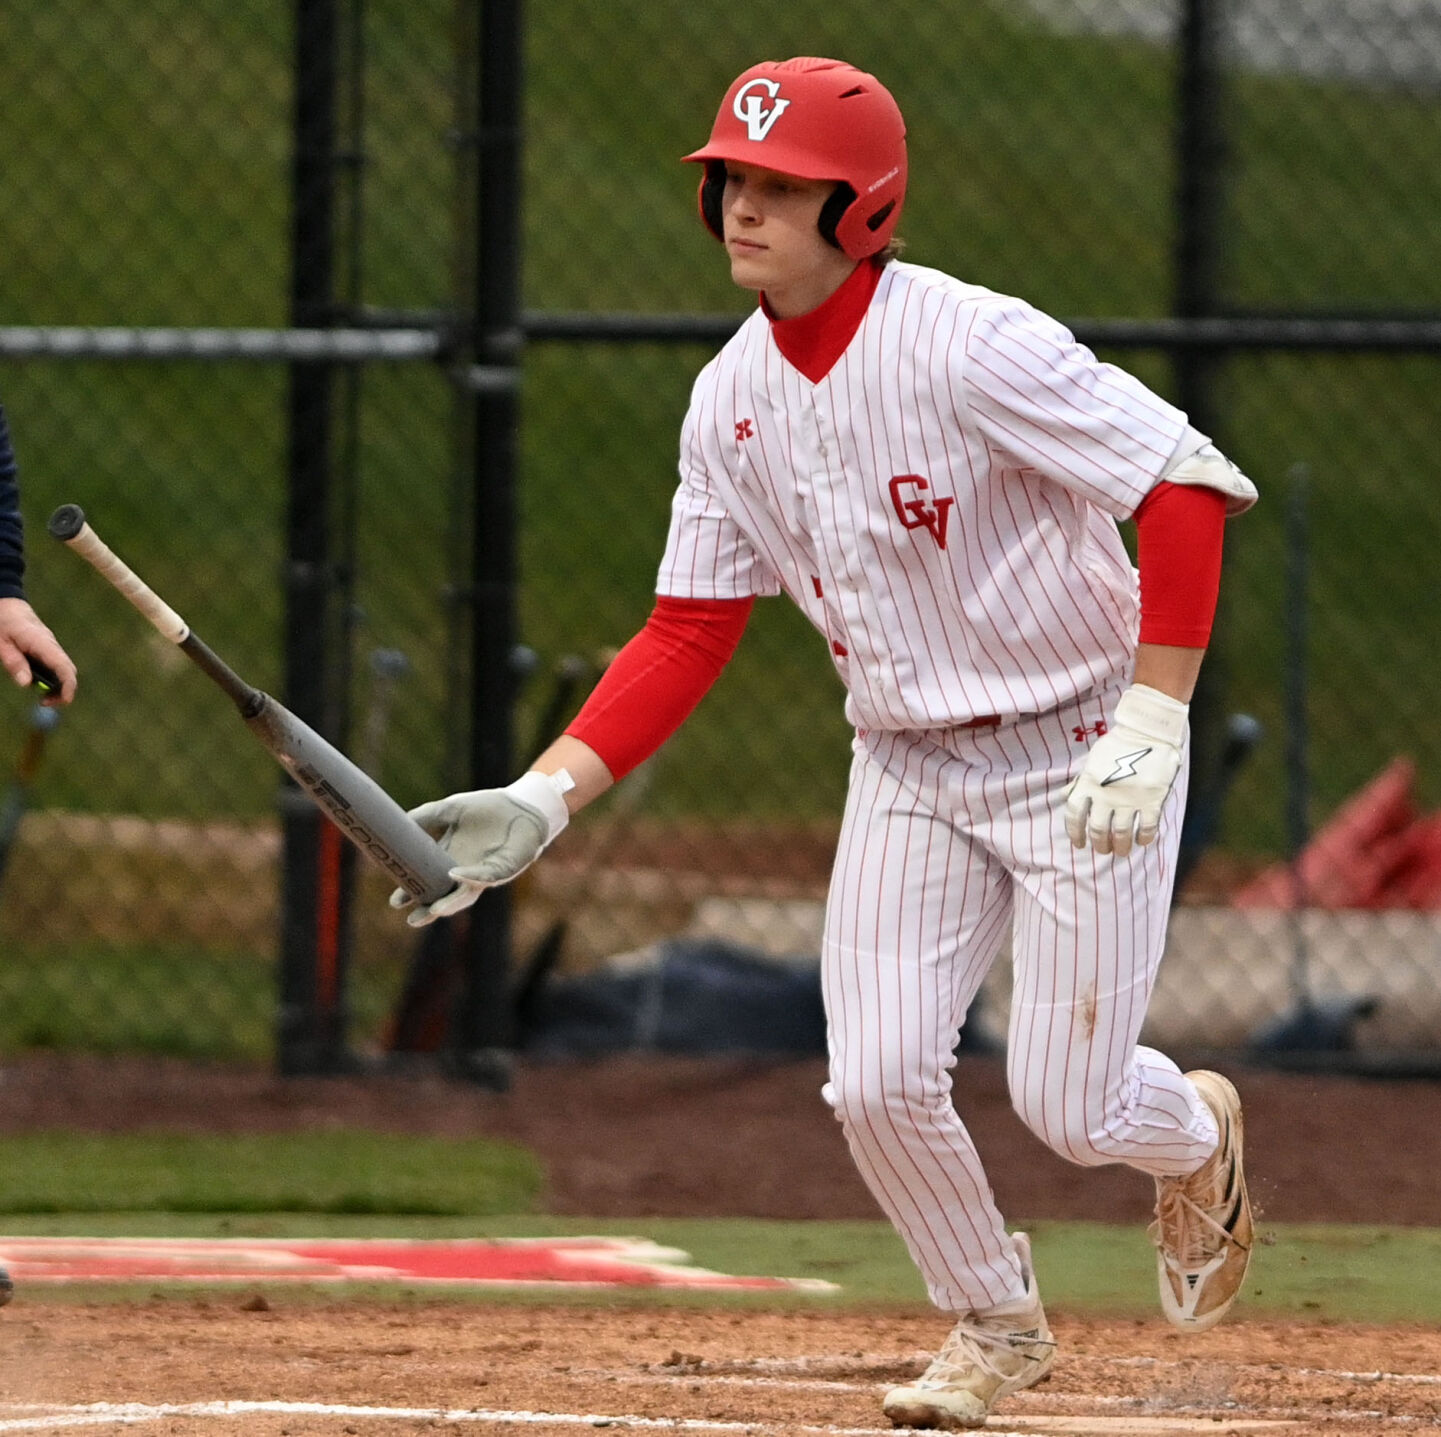 Cumberland Valley baseball dominates North Allegheny with a 13-3 mercy-rule win